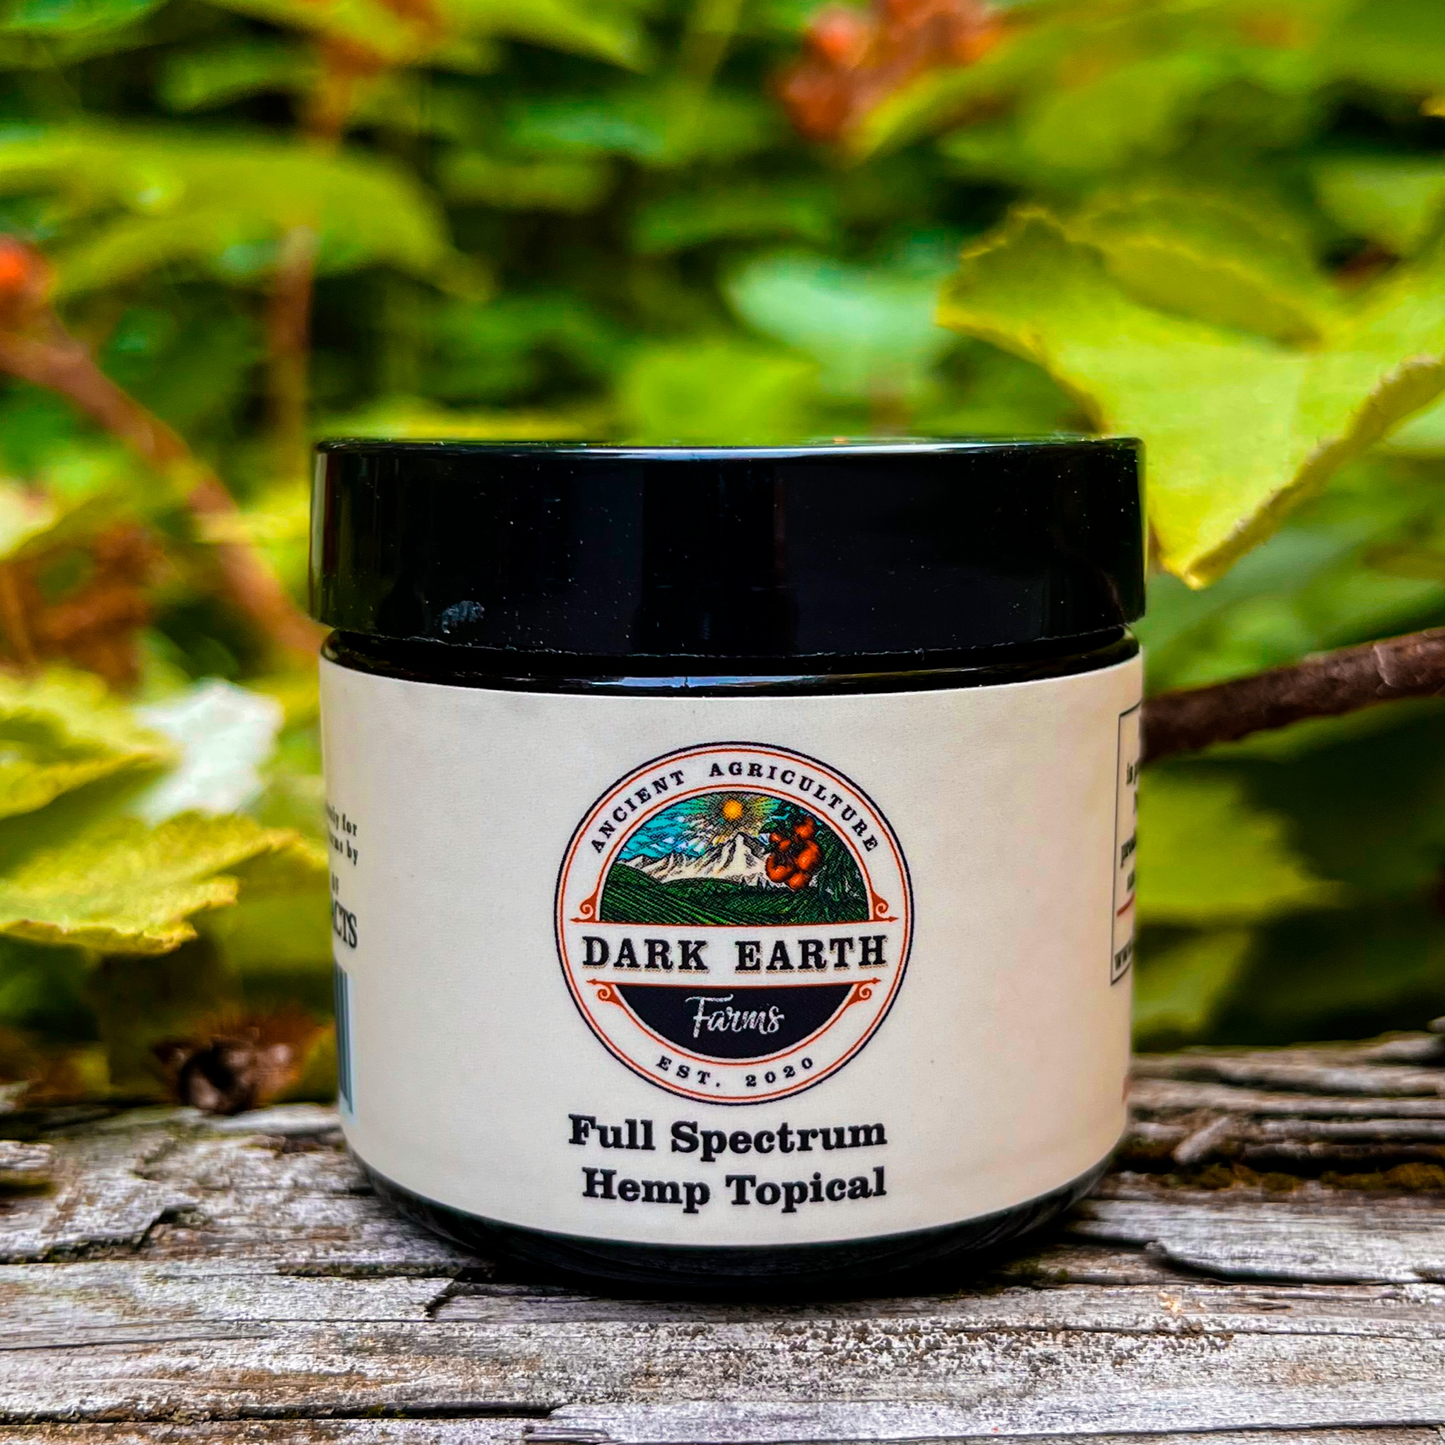 An image of a small jar labeled Dark Earth Farms Full Spectrum Hemp Topical, featuring a blue and yellow label with the brand name and product information. The jar contains 2000mg of CBD cream with terpenes and cannabinoids, designed for targeted relief from pain and inflammation. The jar is placed on a wooden surface, surrounded by hemp leaves, and the cream is shown oozing out of the jar, ready for application.